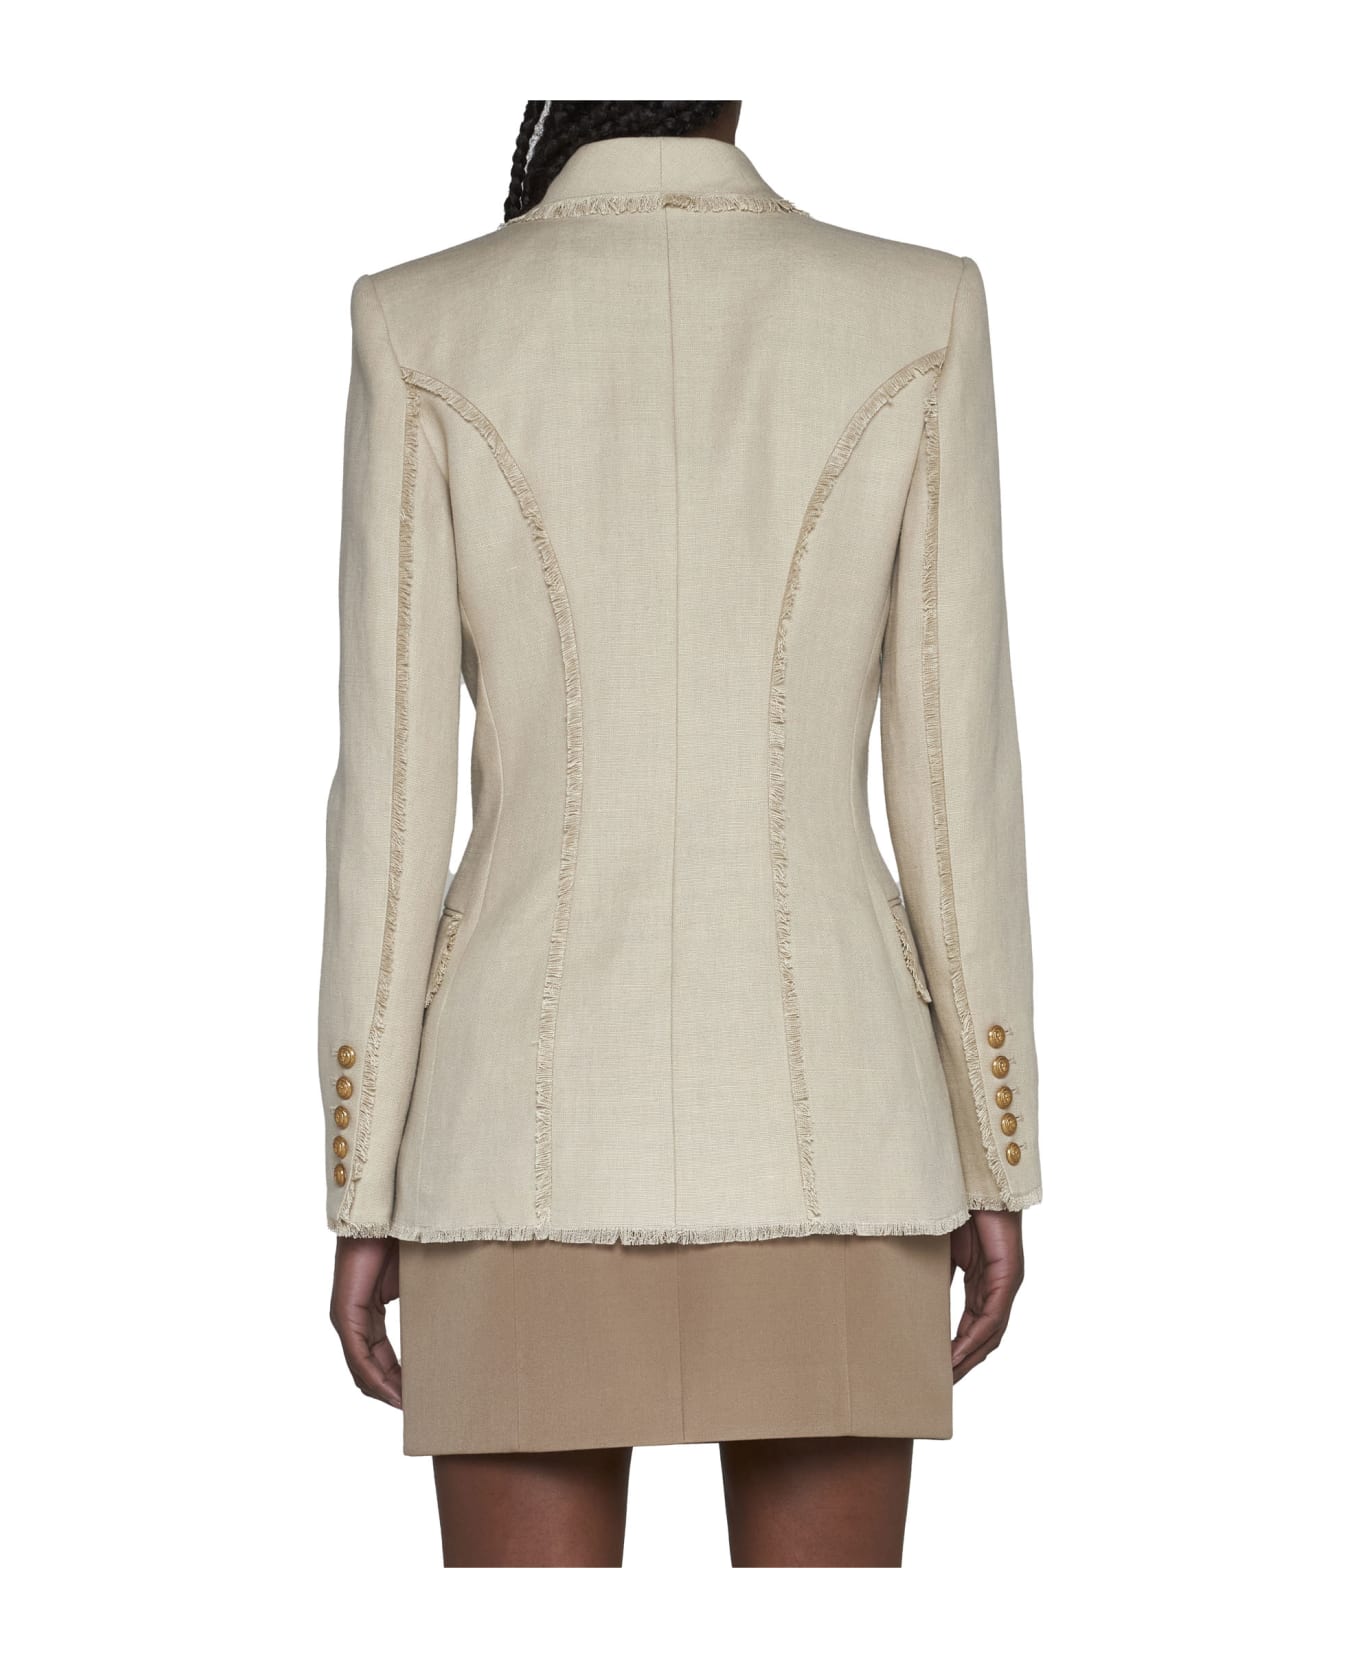 Balmain Double-breasted Fray-trimmed Blazer - Beige ブレザー